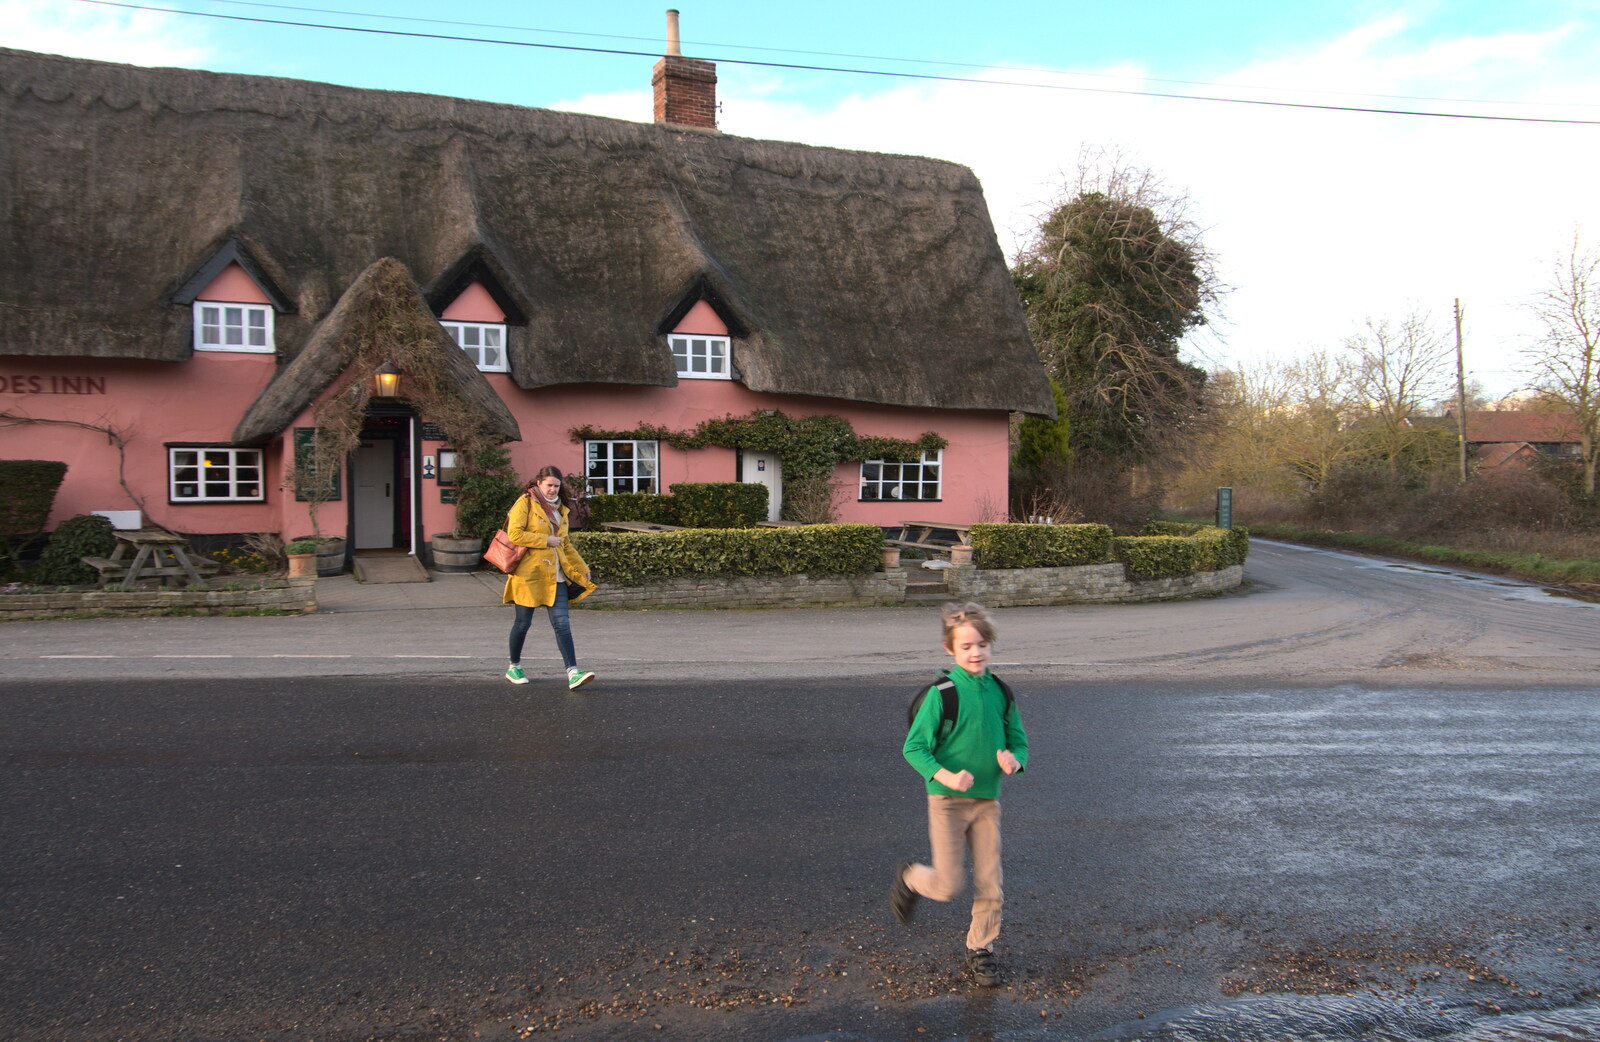 Isobel and Harry from Sunday Lunch and a SwiftKey Trip to Nando's, Thornham and Bayswater - 22nd February 2020